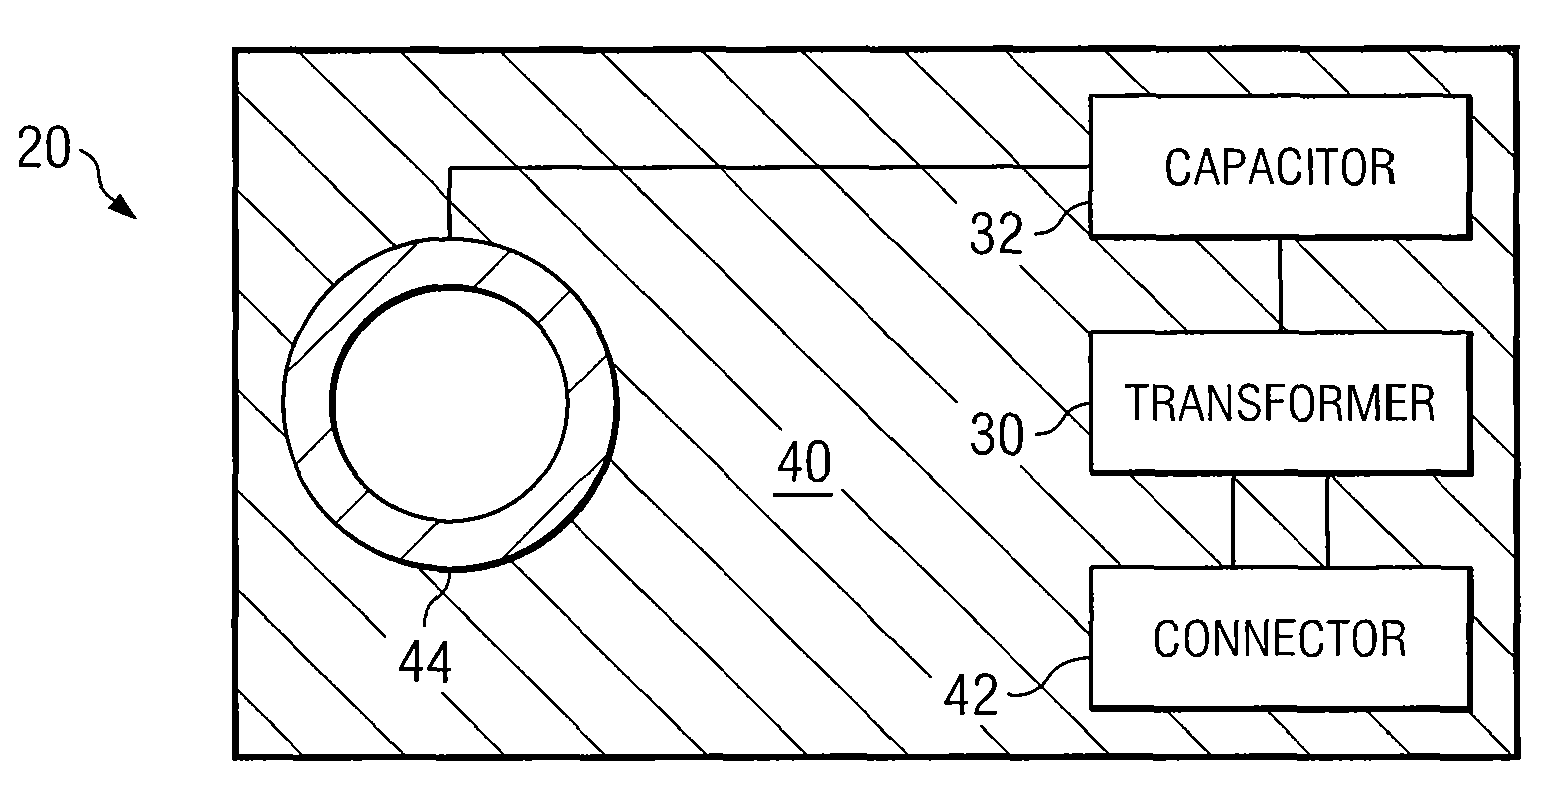 Coupling of communications signals to a power line